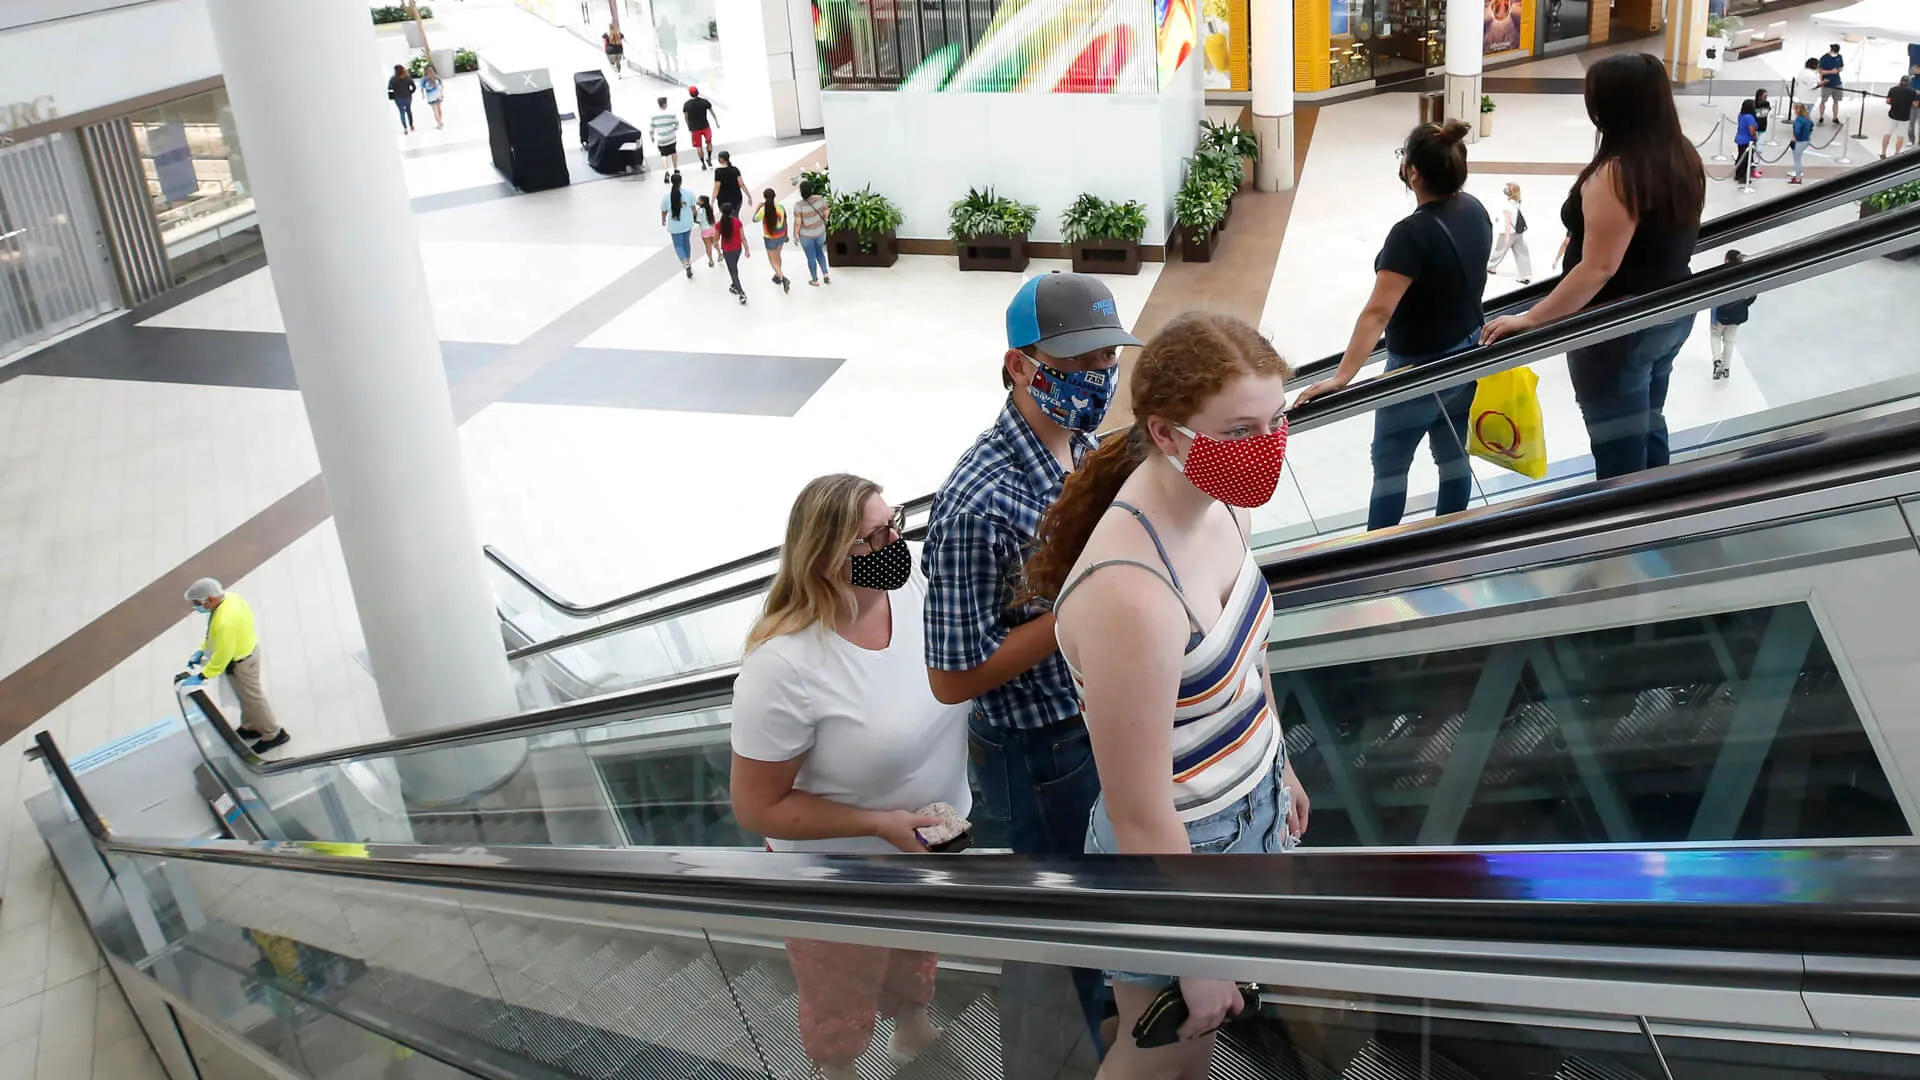 Mandatory Credit: Photo by Rich Pedroncelli/AP/Shutterstock (10684108a)People wearing face masks take an escalator to the second floor of the Arden Fair Mall in Sacramento, Calif.